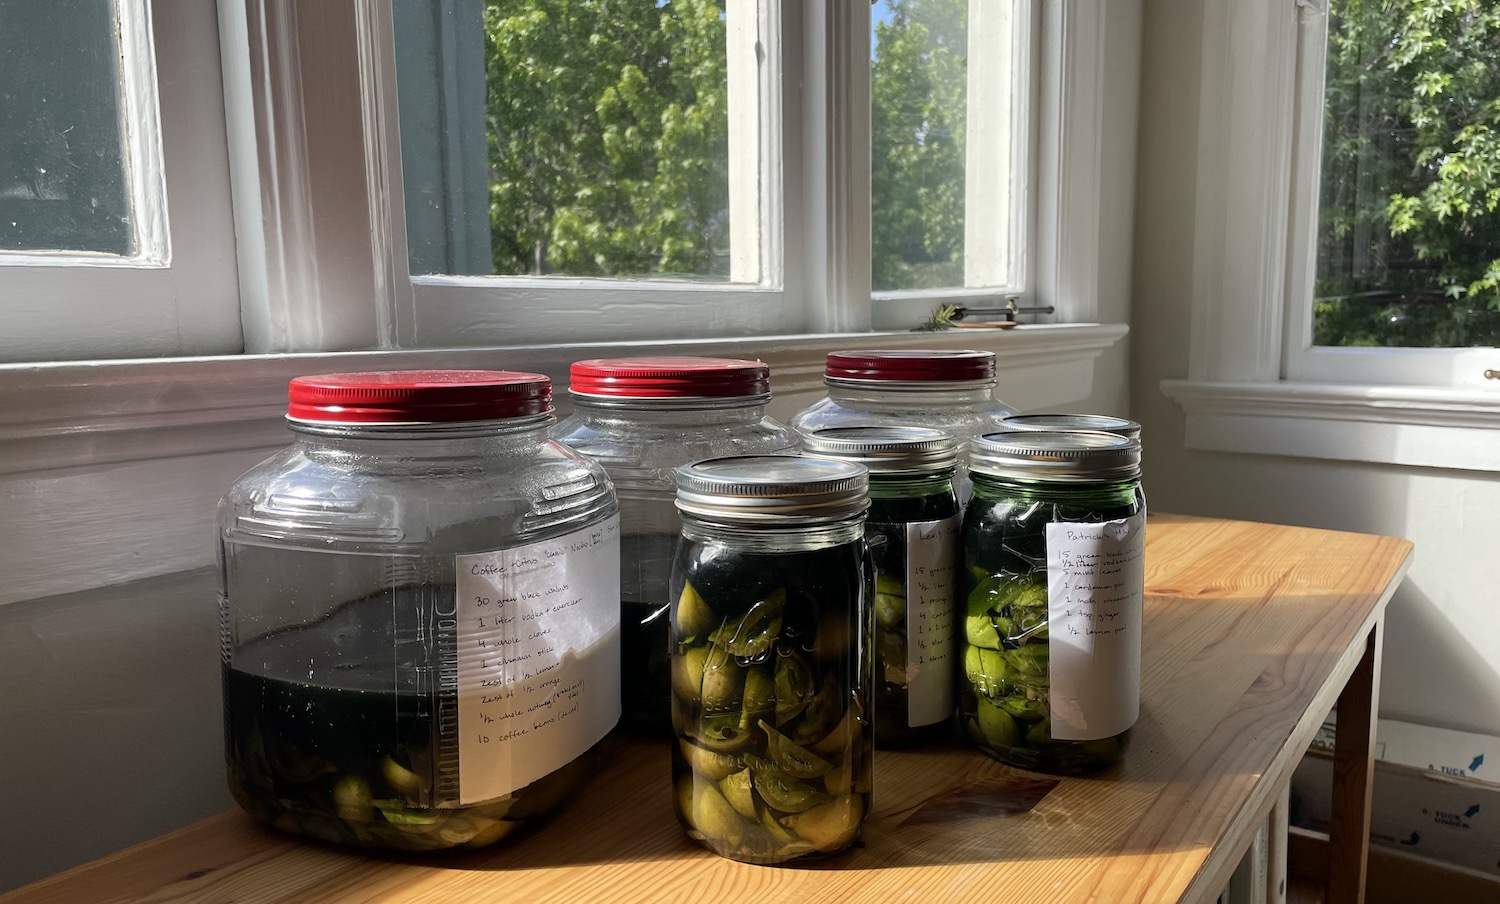 The nocini back in June, when I could still open all the jars.